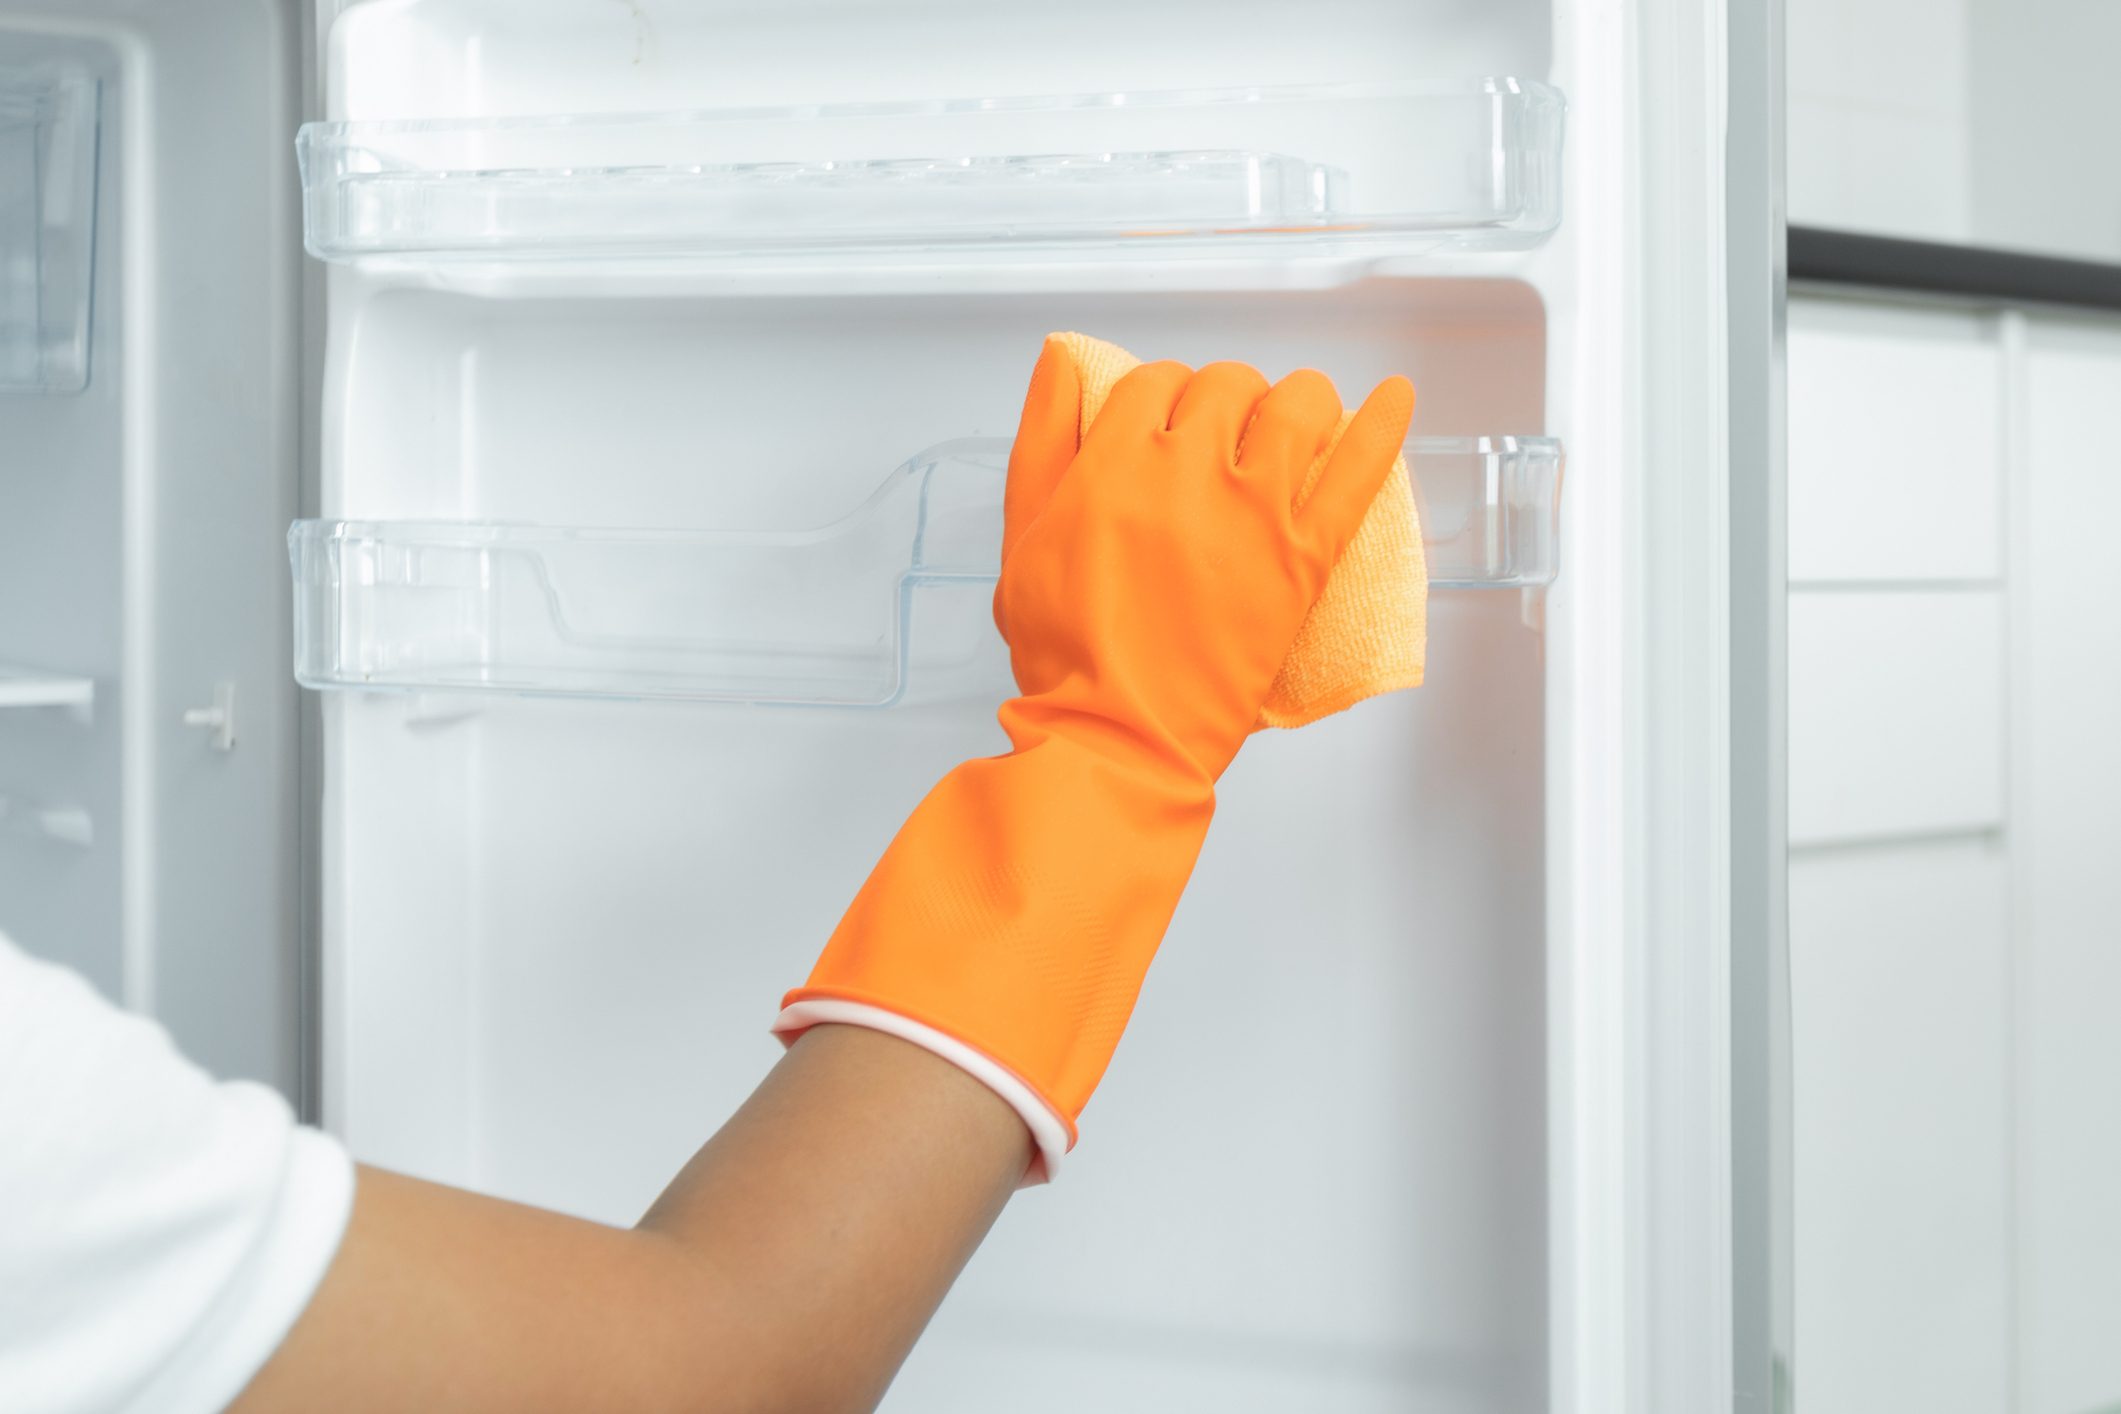 How To: Fridge Cleaning 